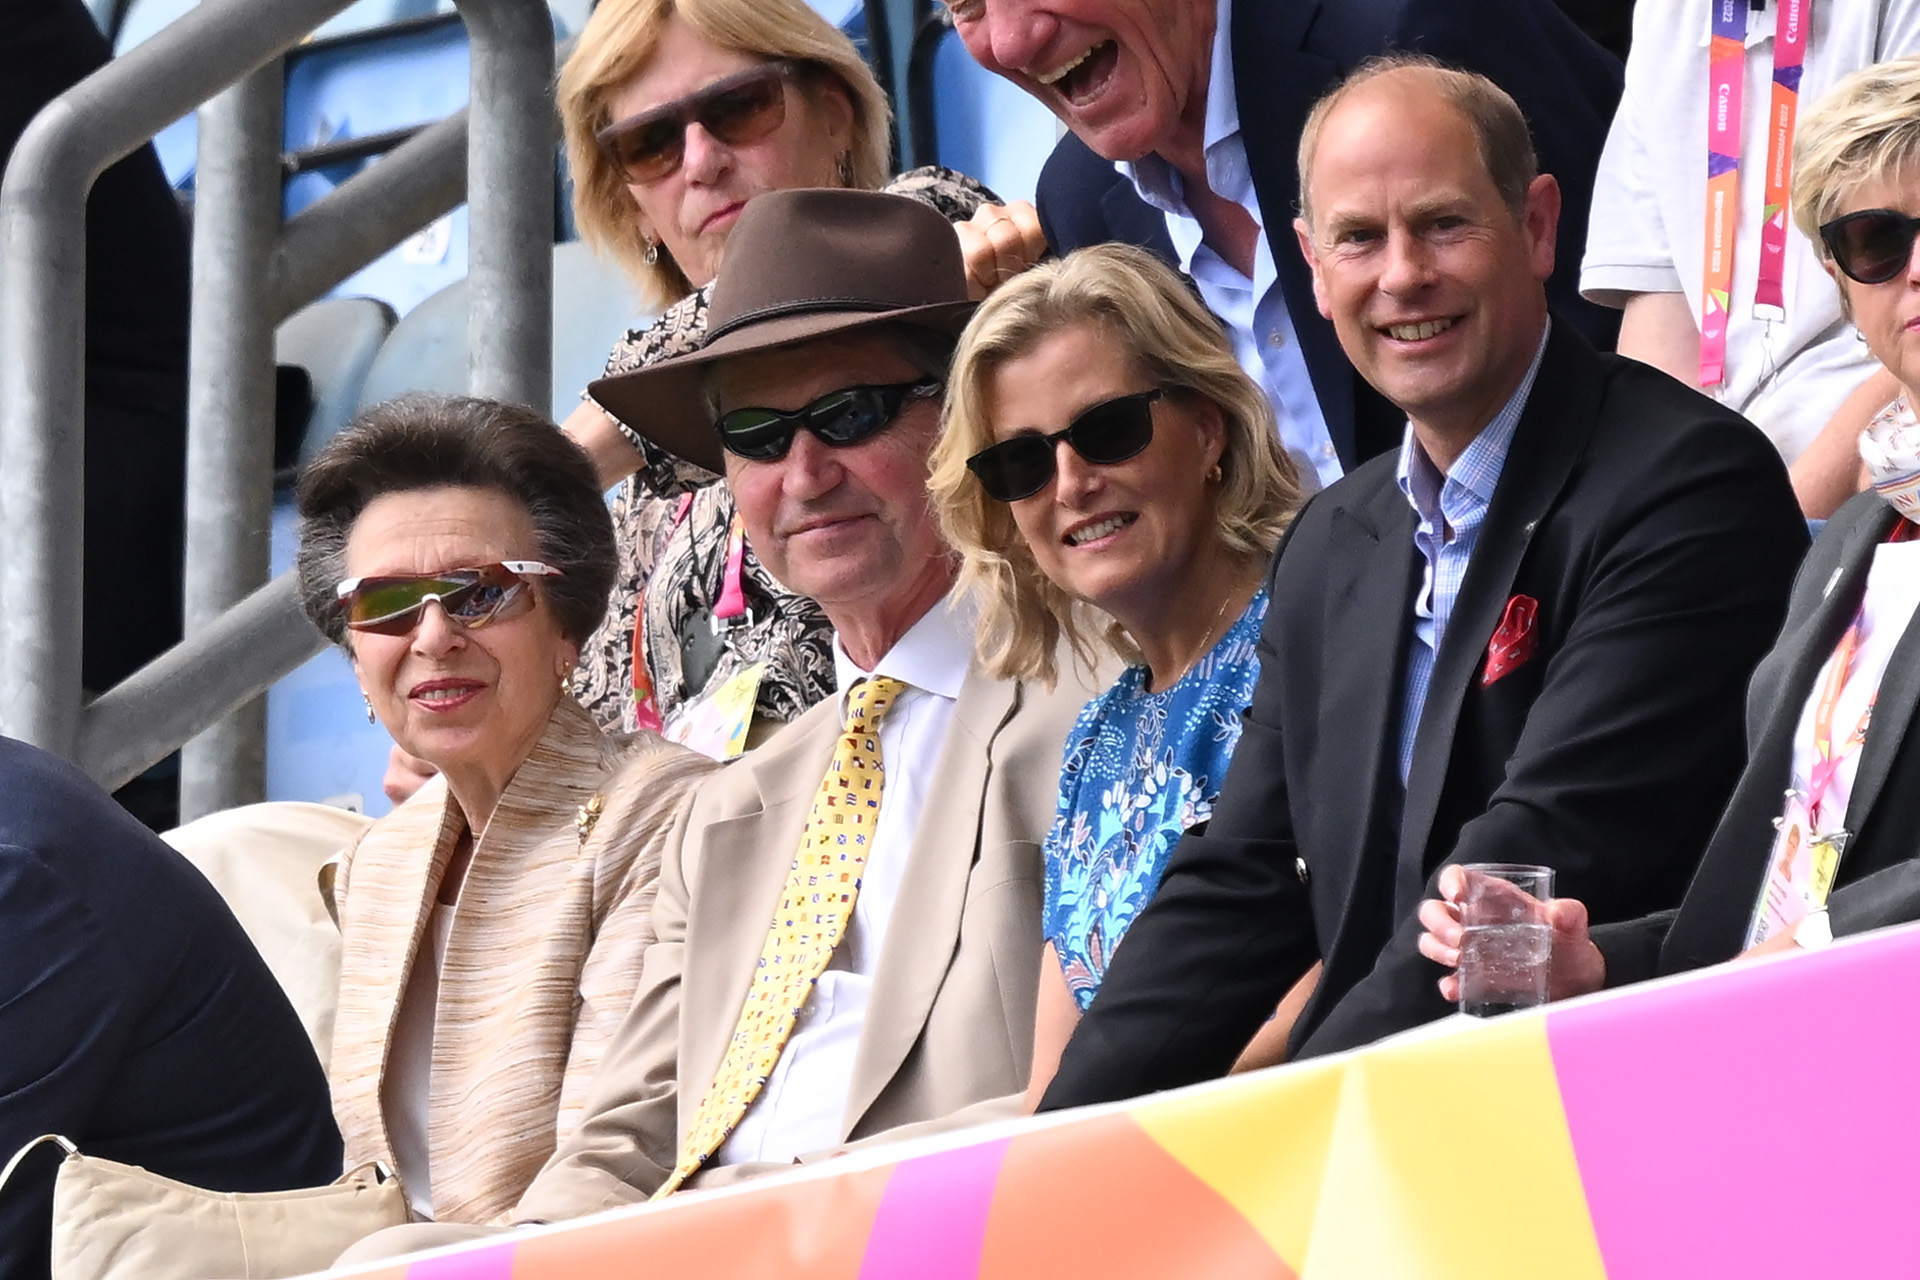 The Princess Royal, Sir Tim Laurence and The Earl and Countess of Wessex at the Commonwealth Games